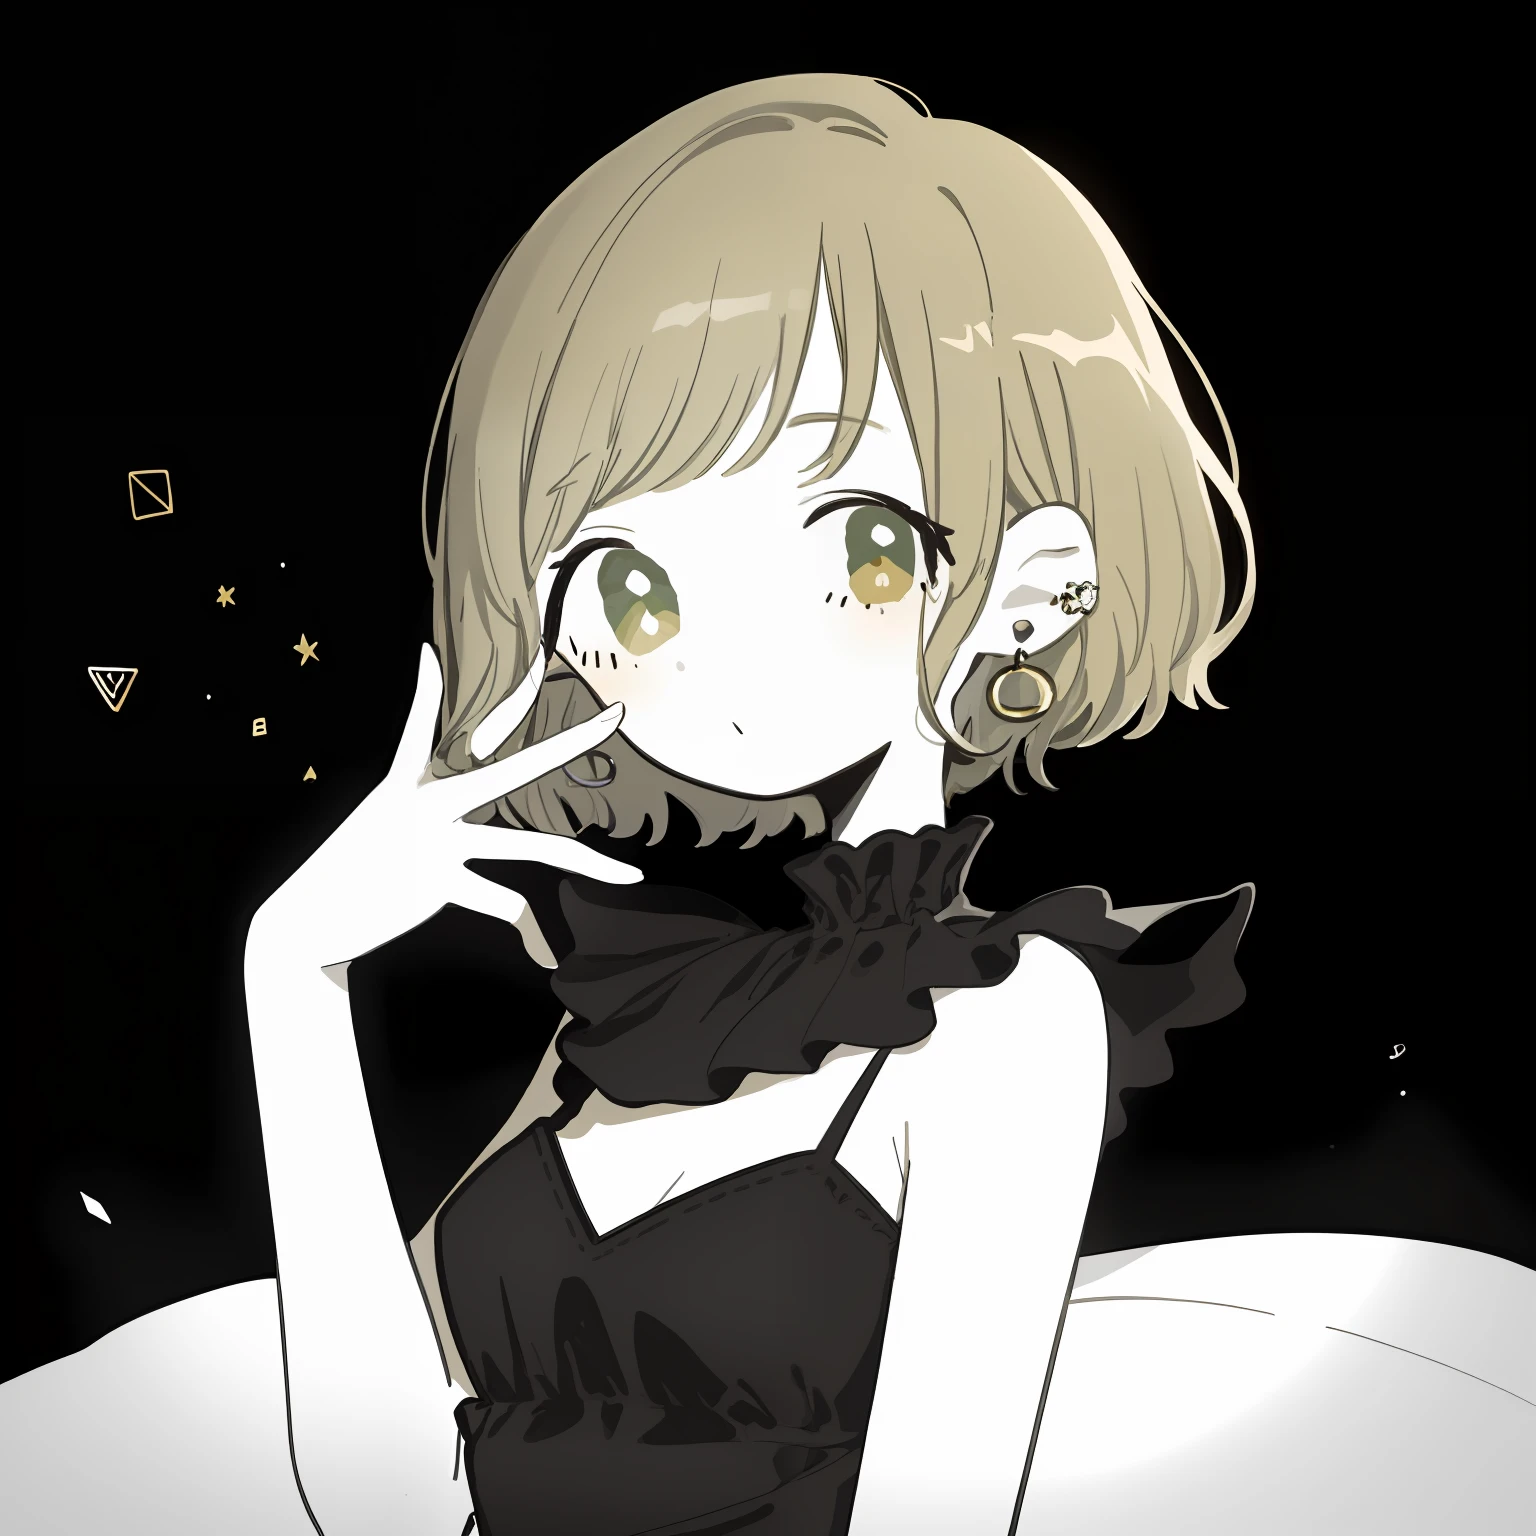 (nmasterpiece,masterpiece)Best qualities,best quality,figure(main character),(1girl:1.5),(green eyes),(bronde hair+short-cut hair:1.3),closes mouth,ear ring,(Round earrings:1.1),(jewelries:1.1),Pure black background,Look at the audience at eye level,chemise,simplebackground,solo,(Haut du corps:1.1),Pure black shirt,maximalism。